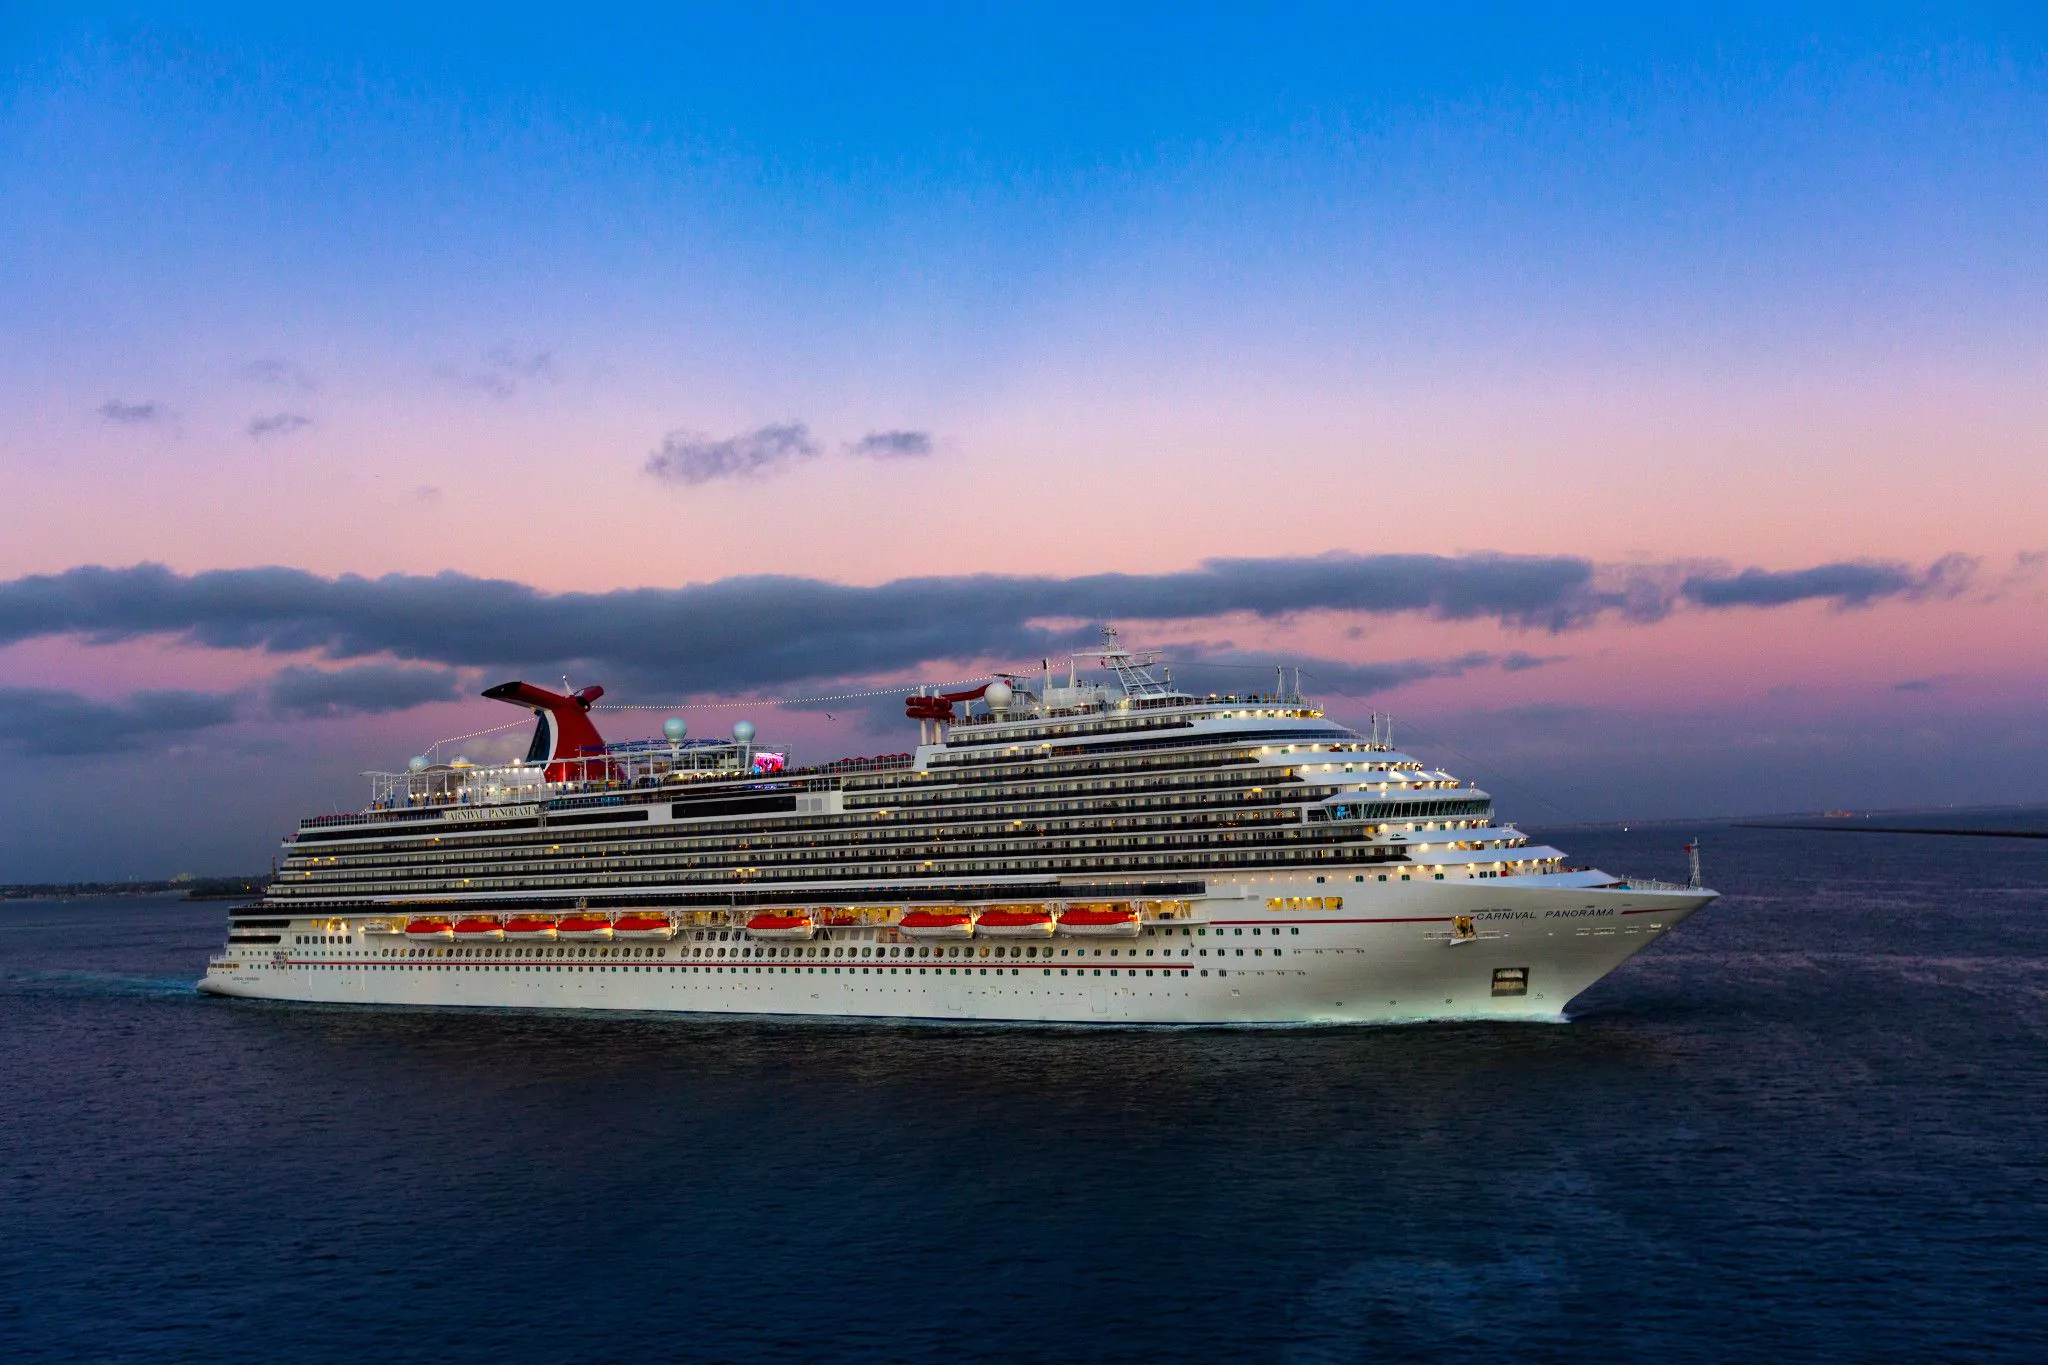 Carnival Cruise Line Expands Cruise Itineraries from Long Beach and Adds More Cruise Options from the West Coast